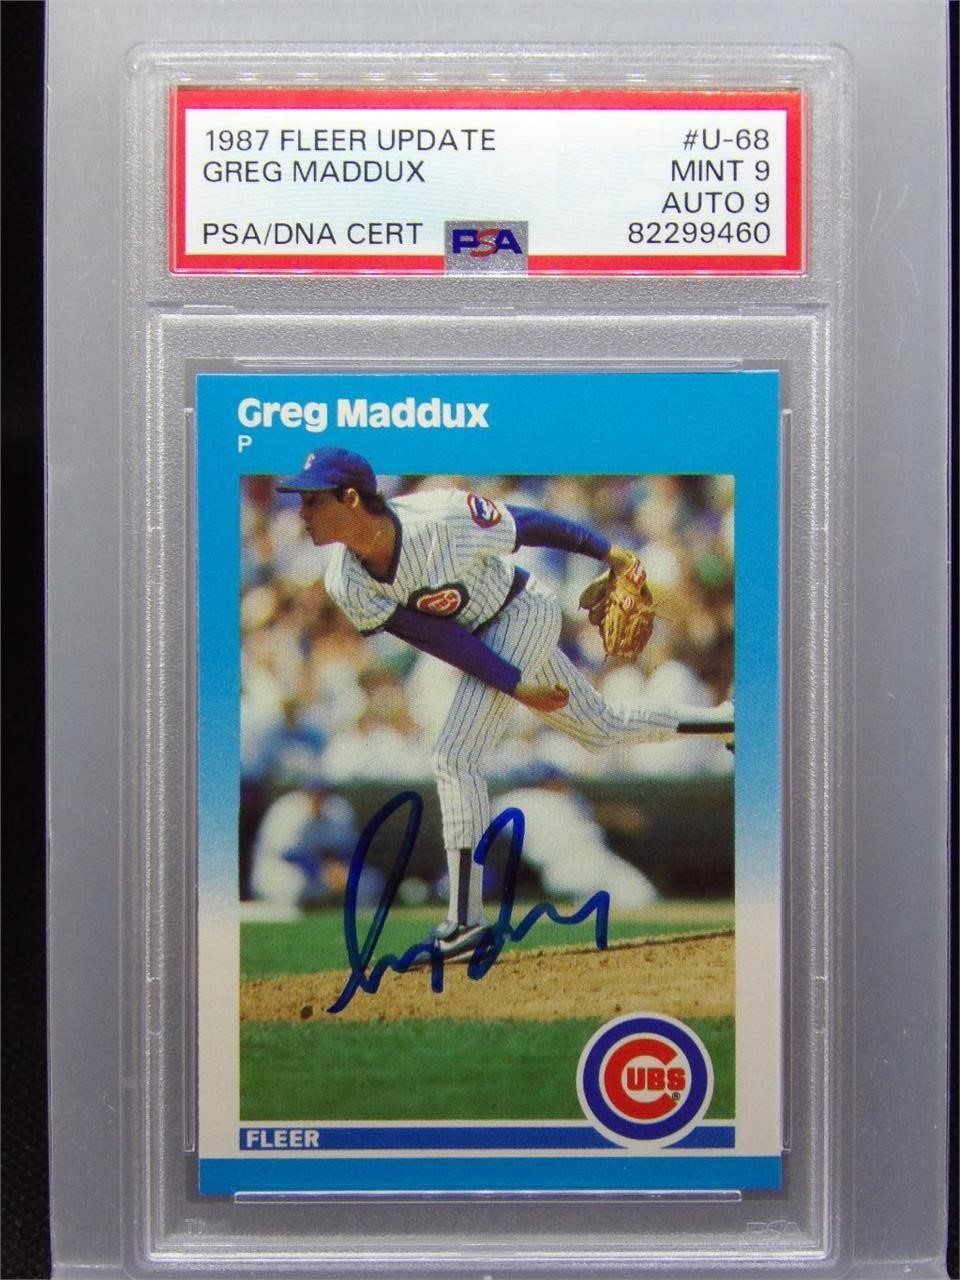 Mixed Sports Card Auction - Closes May 12th 7:00 Central